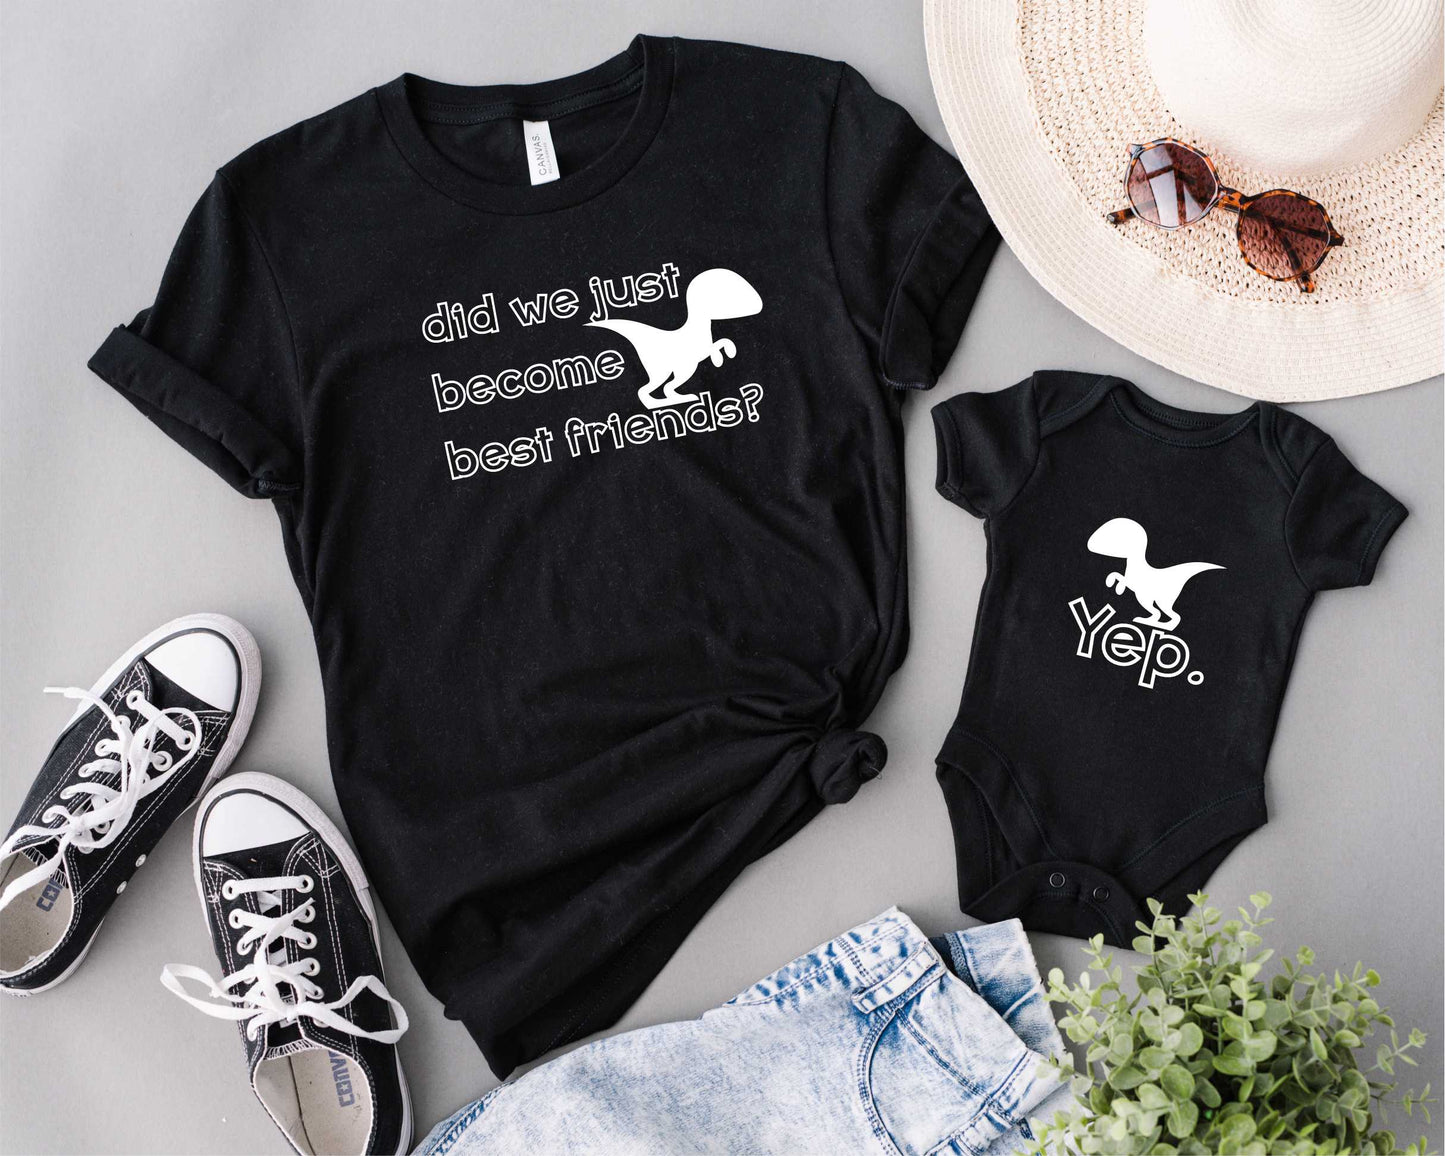 Did We Just Become Best friends? Yep! - Matching Shirts